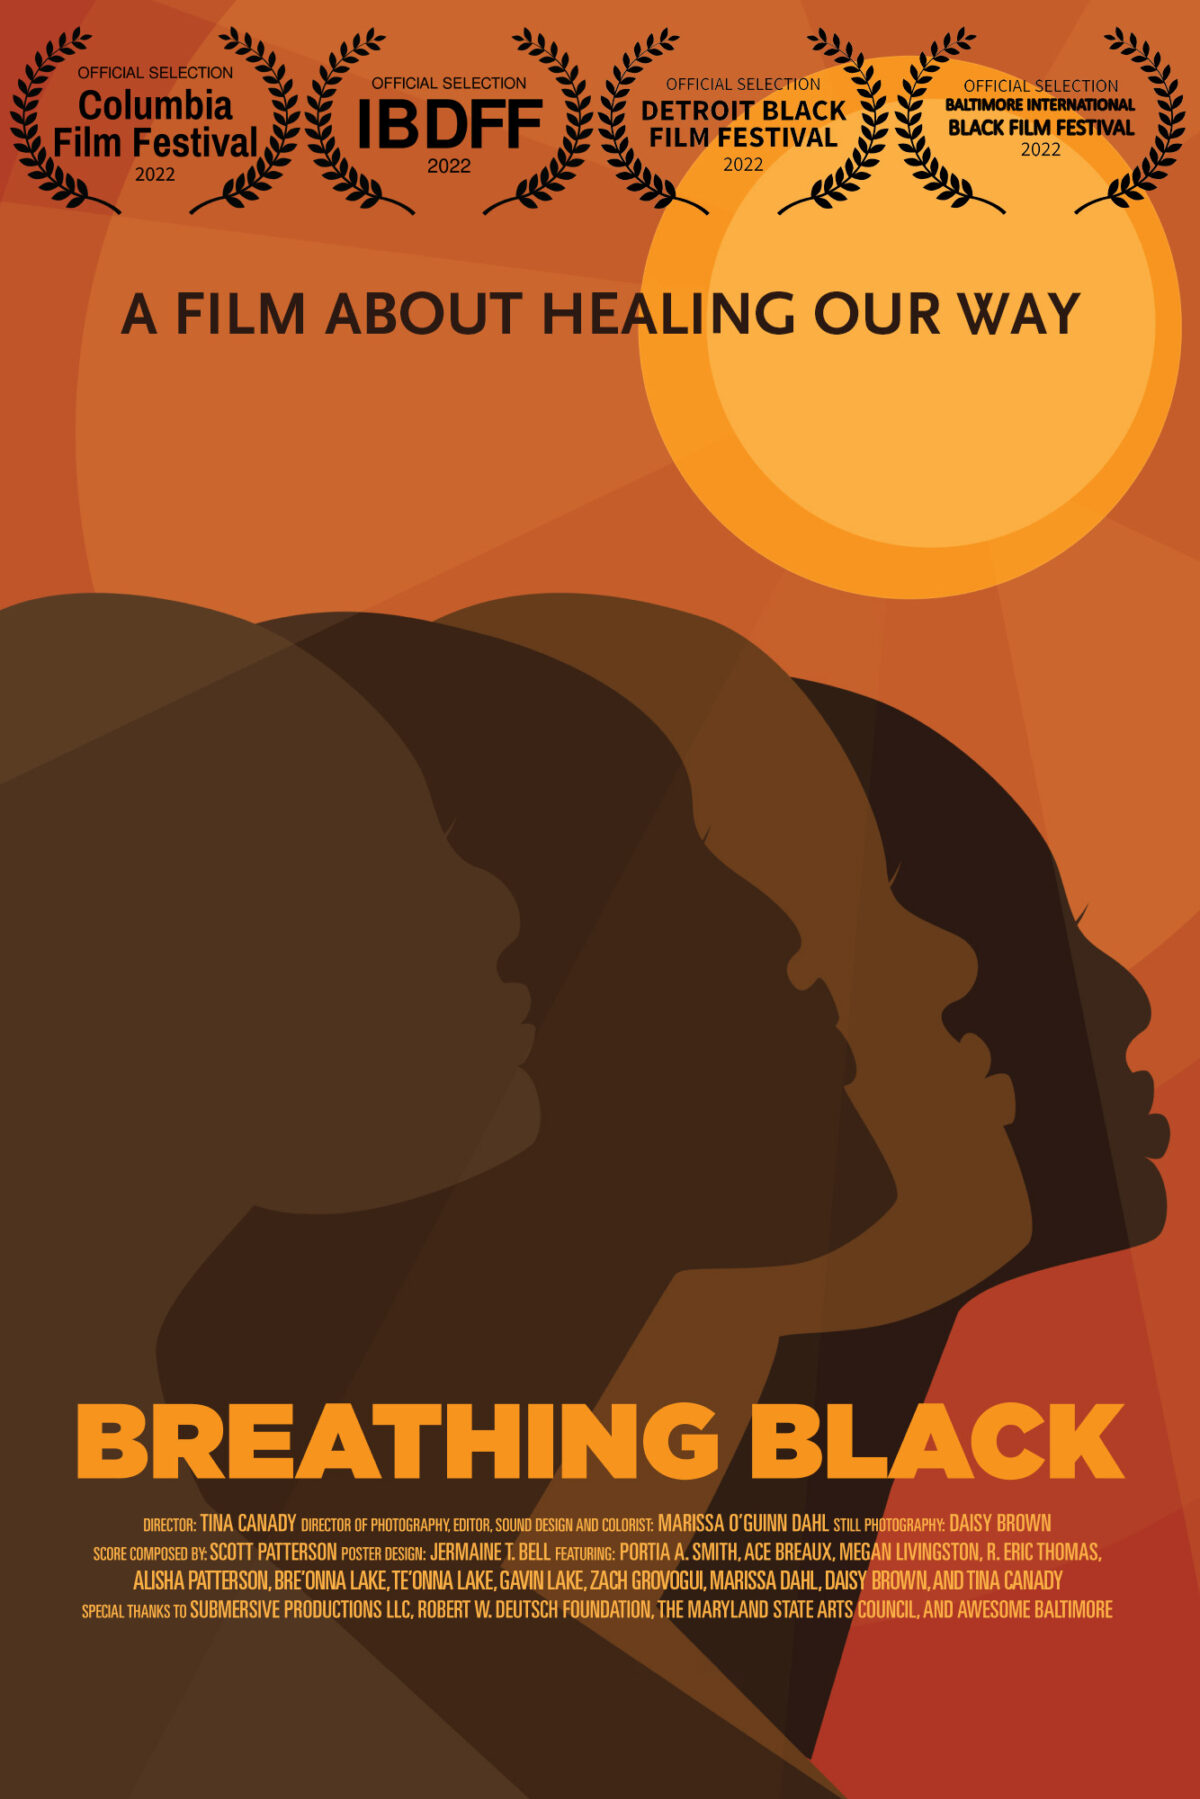 Movie poster featuring silhouettes of four Black people in varying shades against orange background with light orange sun and orange and black text.